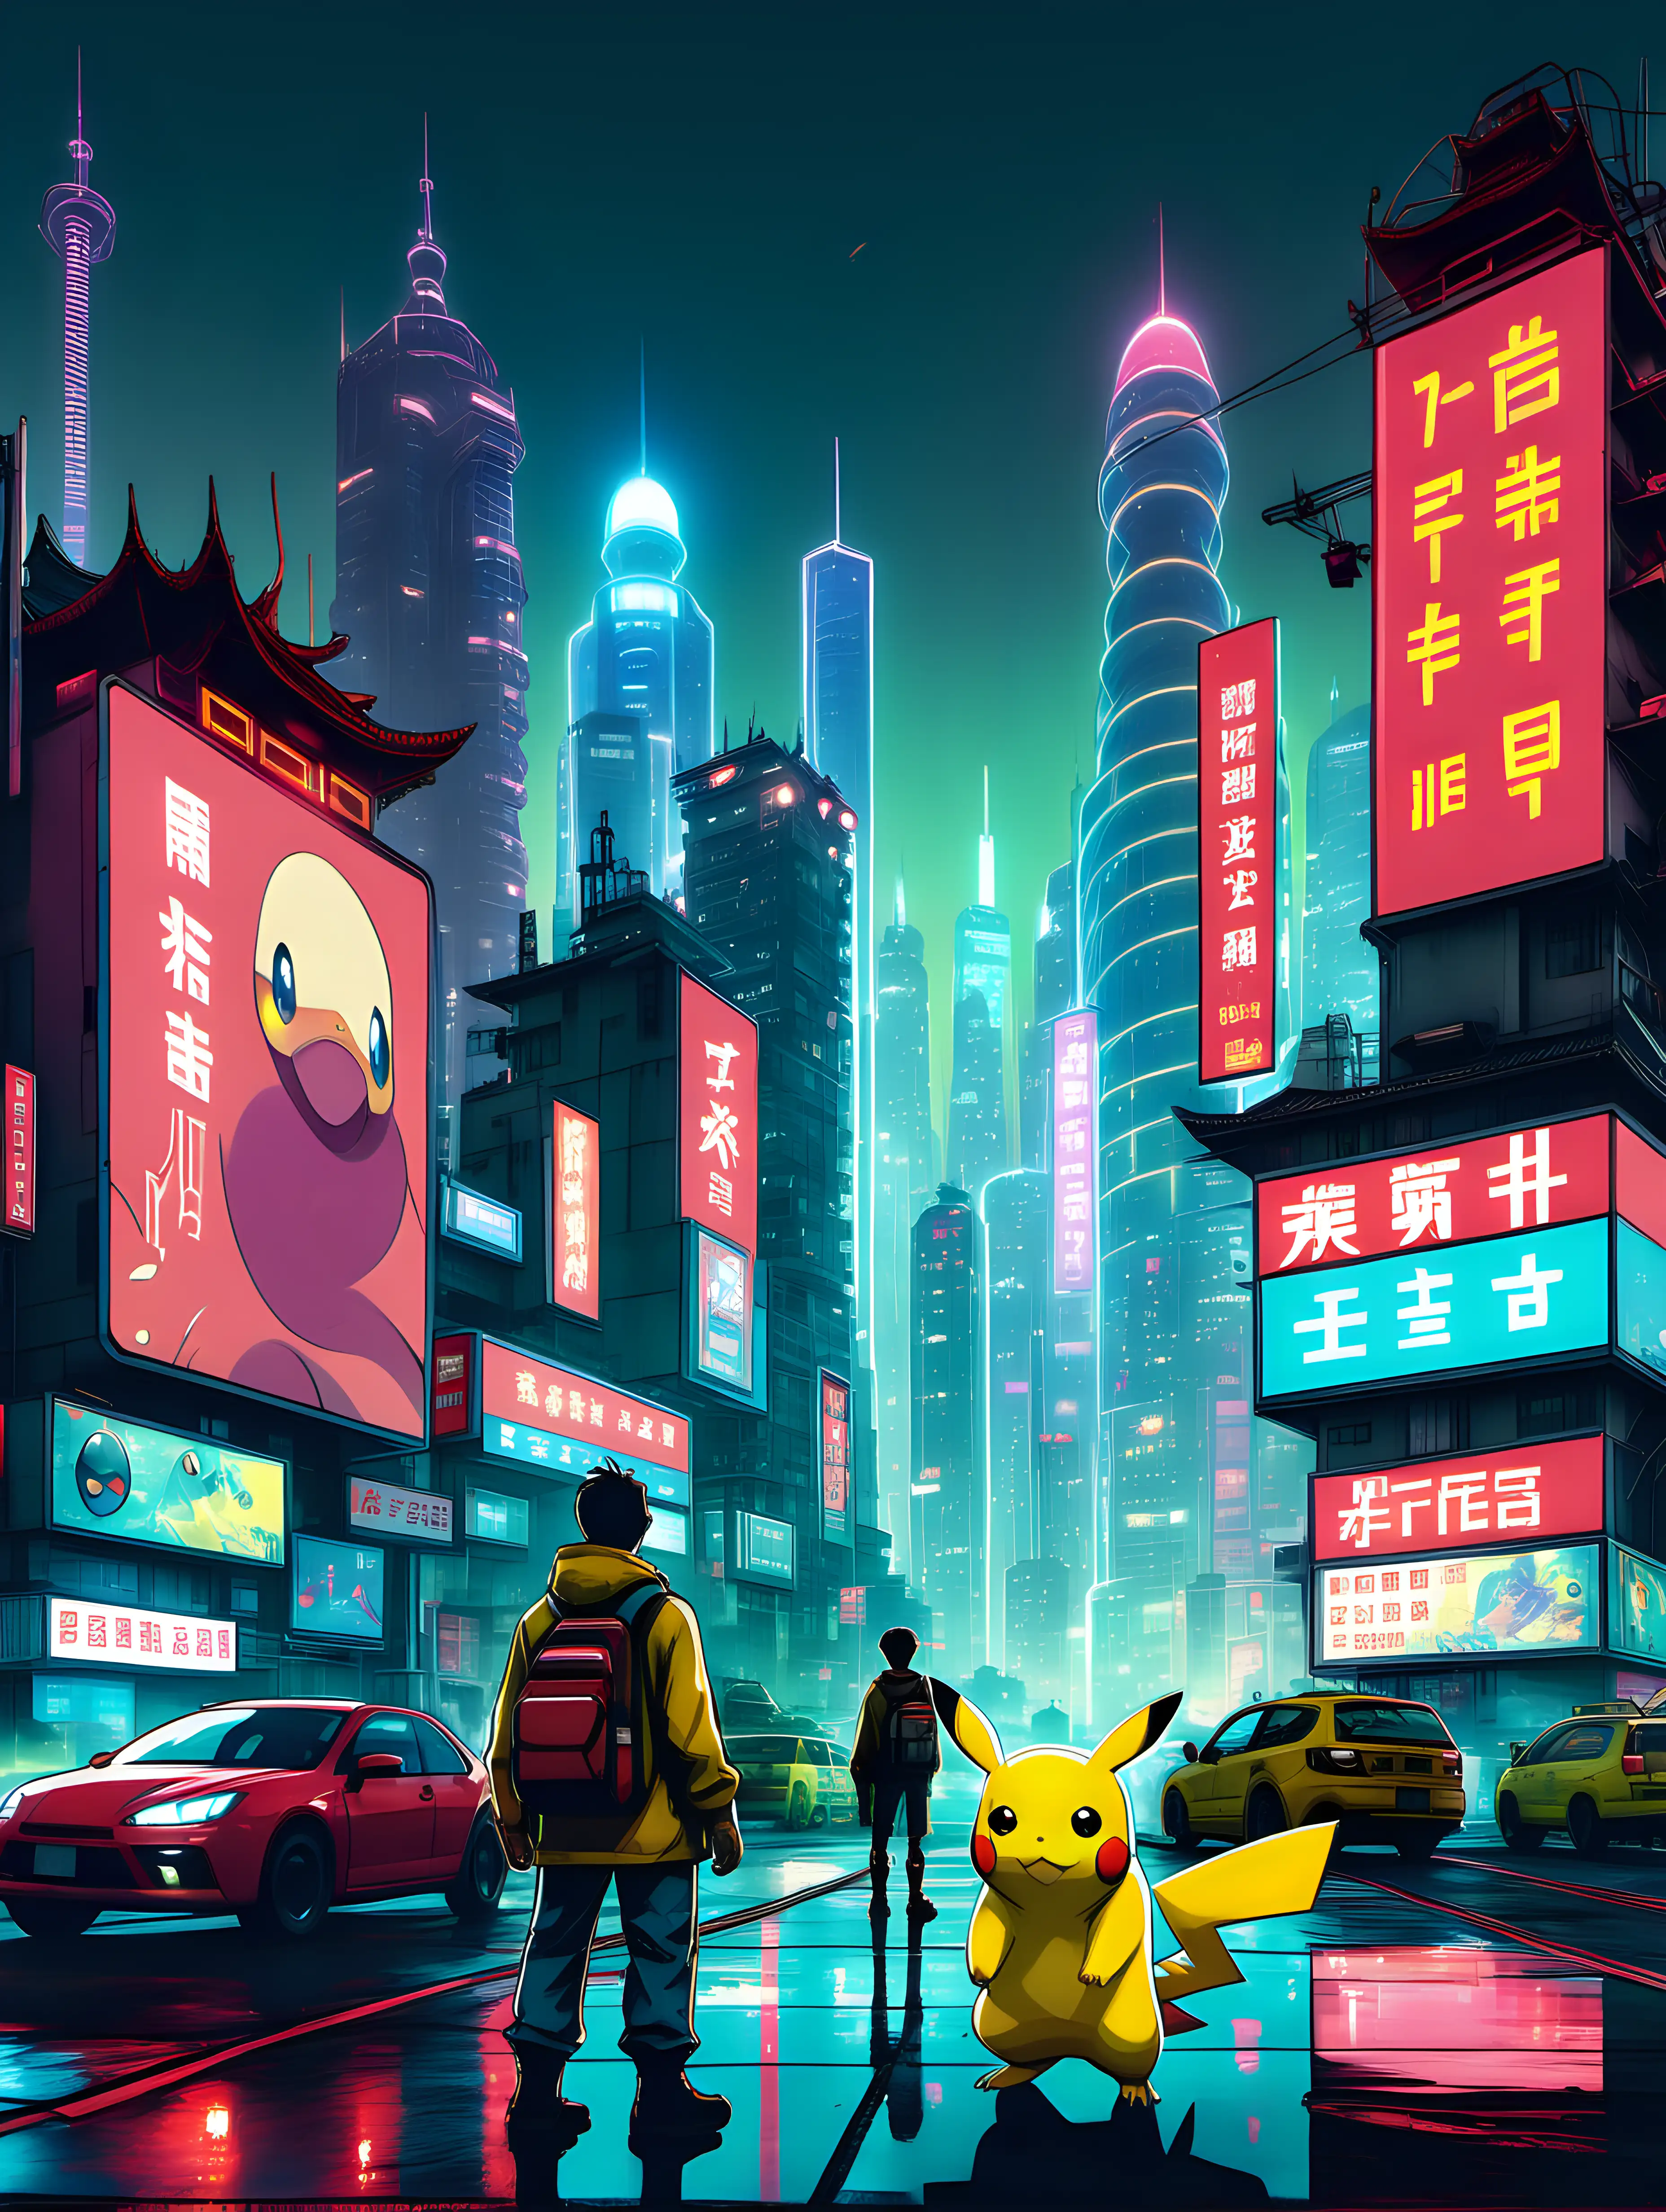 pokemon characters in a futuristic cityscape with holographic advertisements in chinese. The scene is illustrated with a touch of cyberpunk aesthetics, in the style of Simon Stålenhag. It's a night, and the colors used are neon yellow and electric red